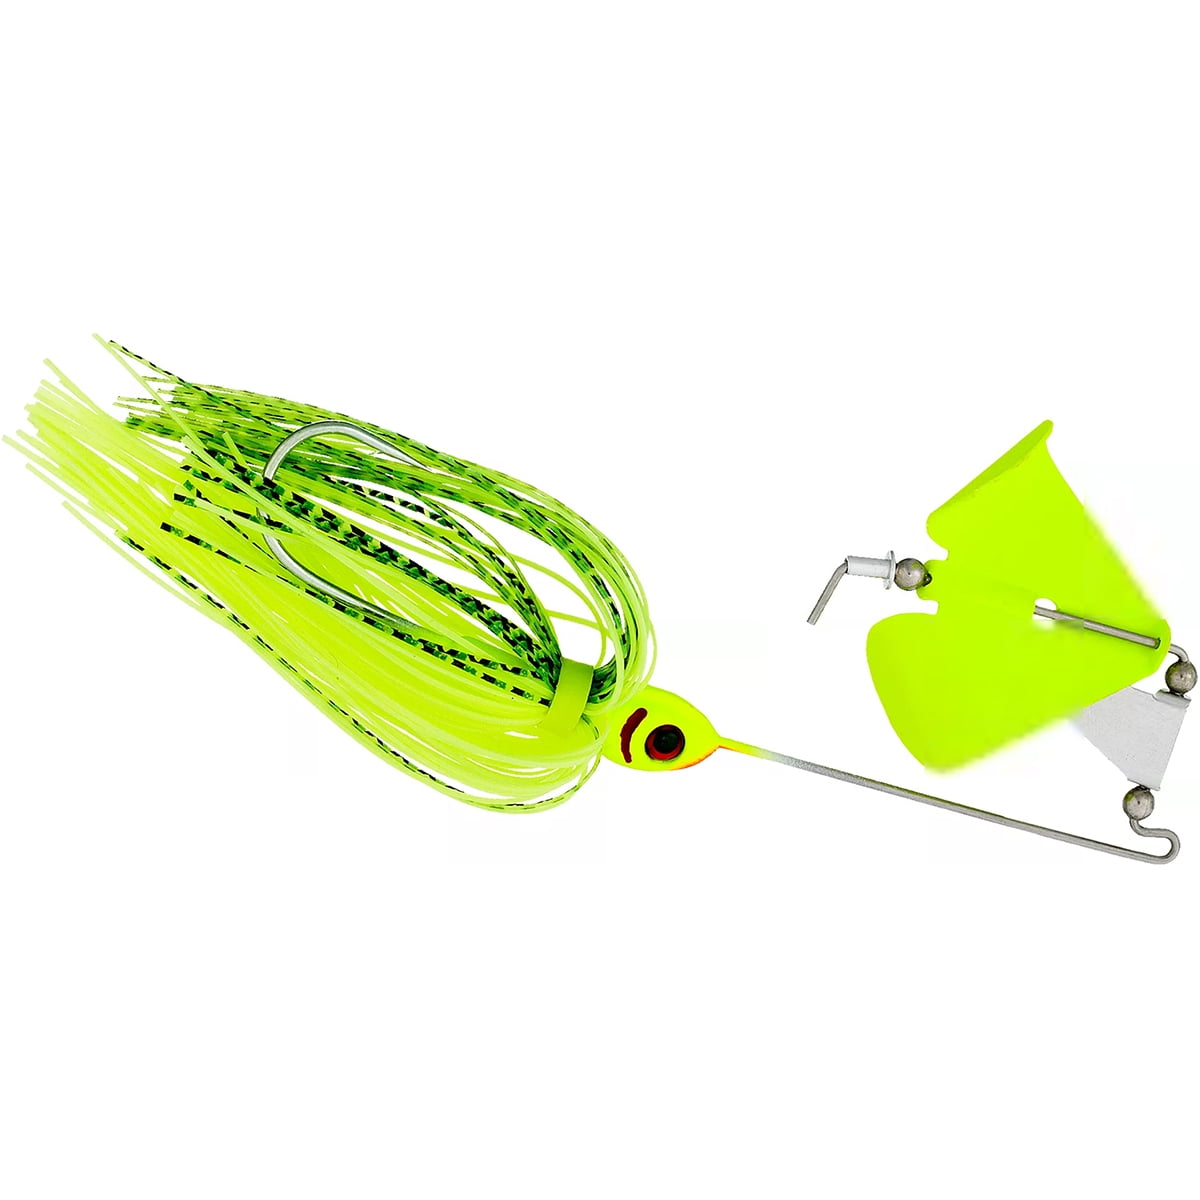 Booyah Buzz Bait 1/4 oz. Fishing Lure - Chartreuse Shad 